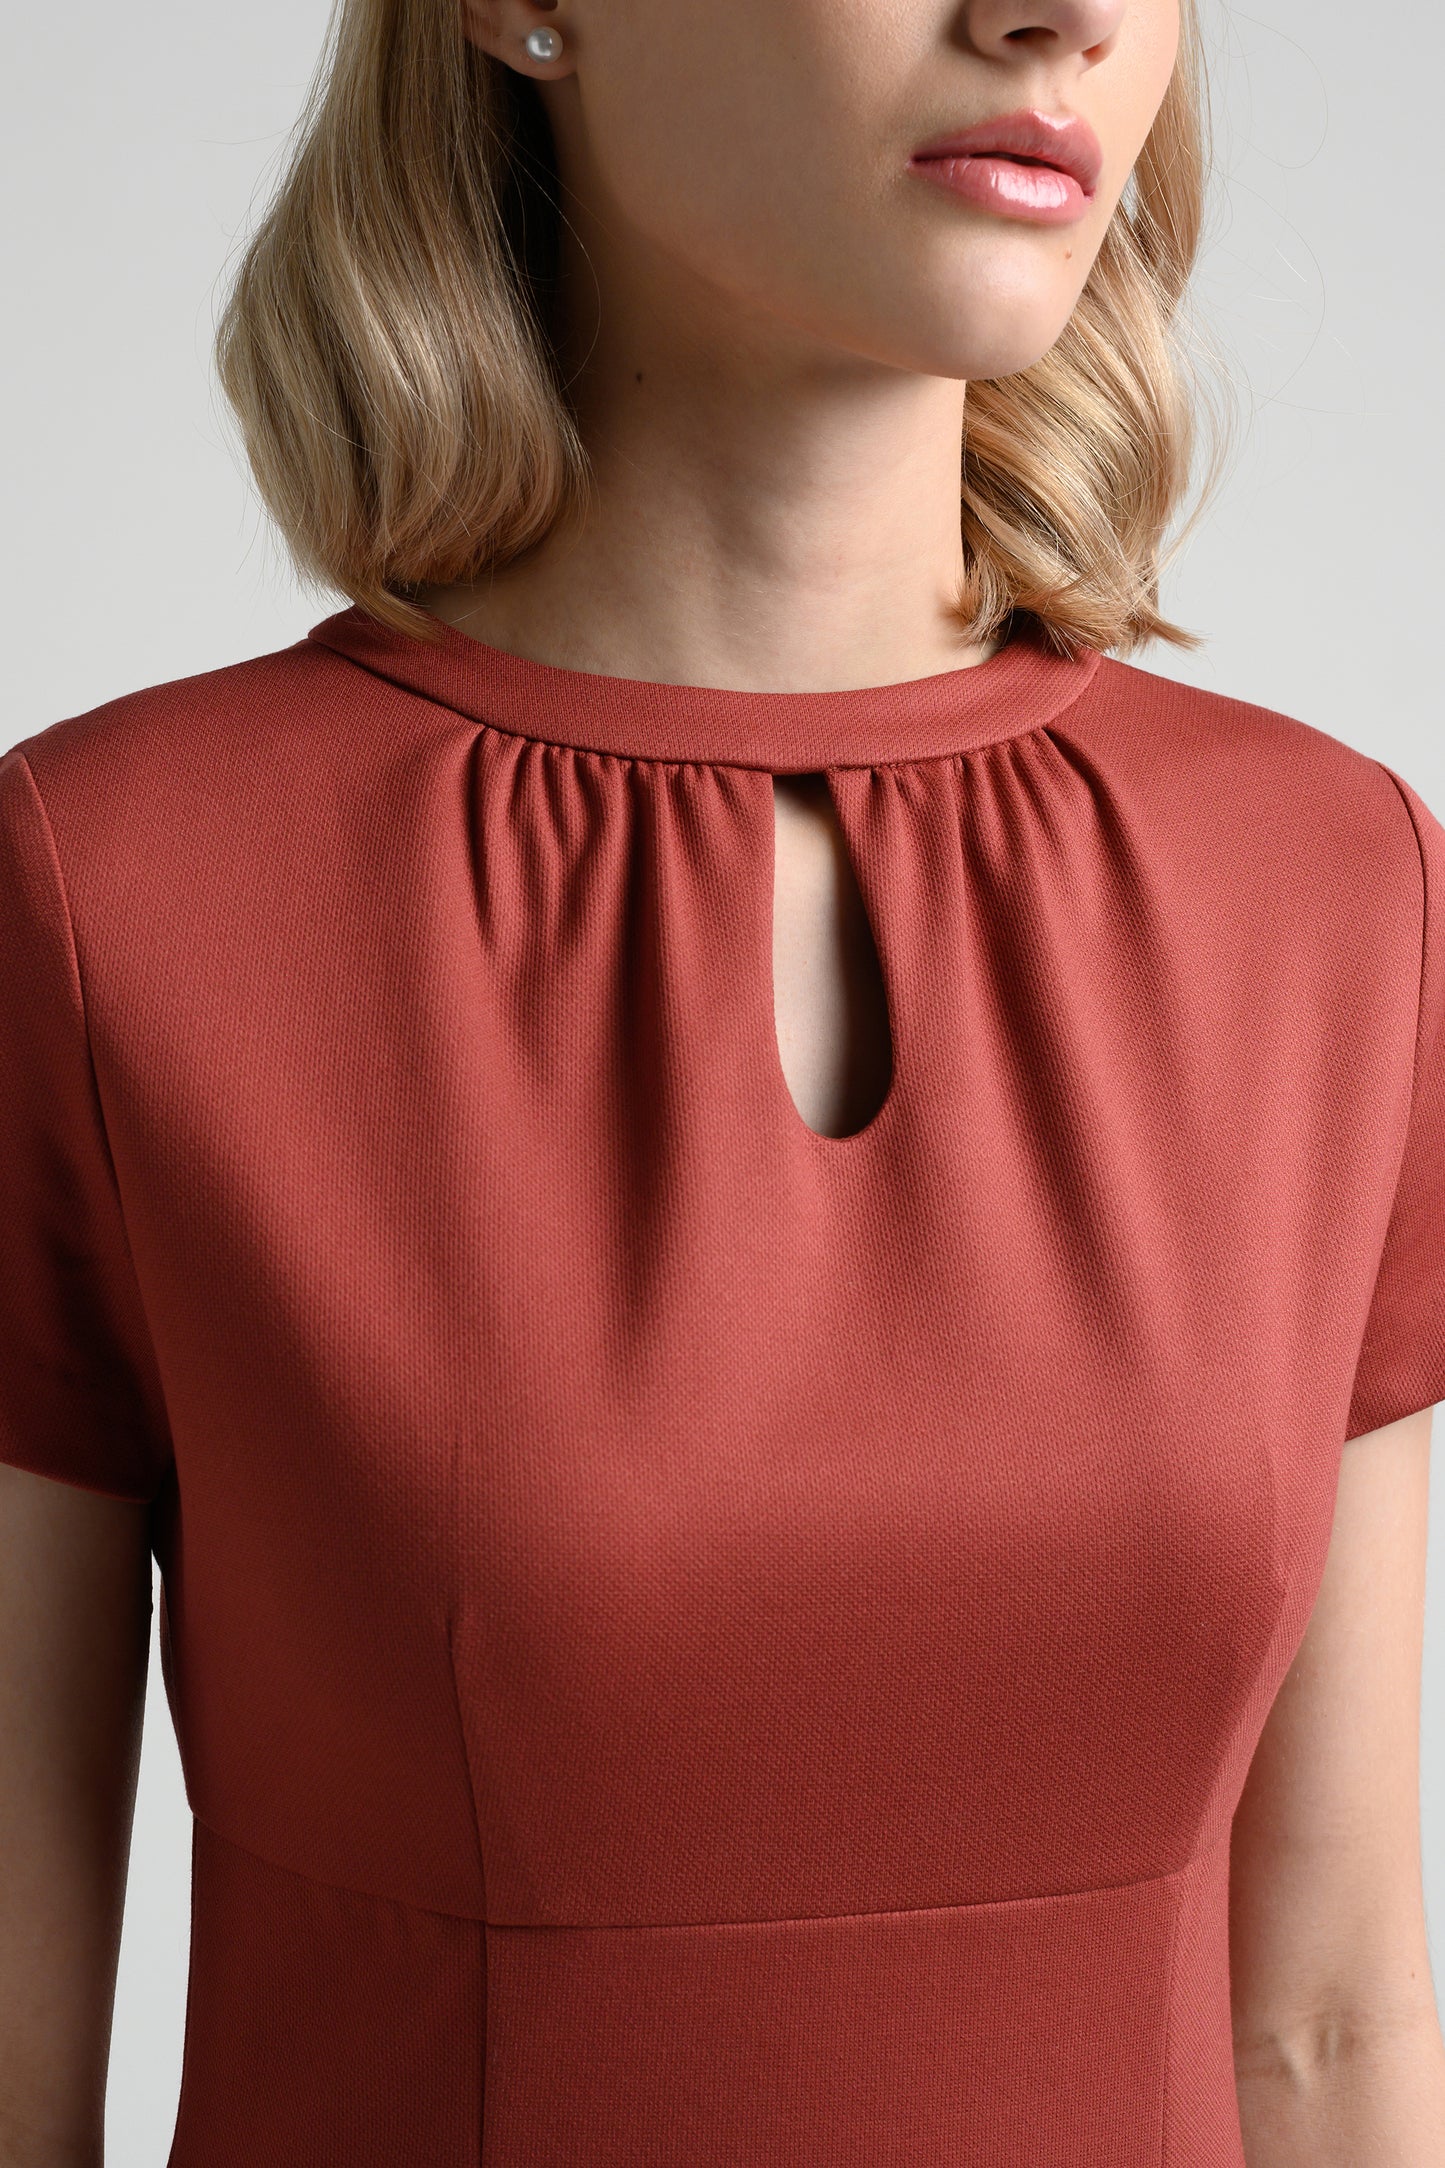 Rosylee Keyhole Fit And Flare Dress - Terracotta 4